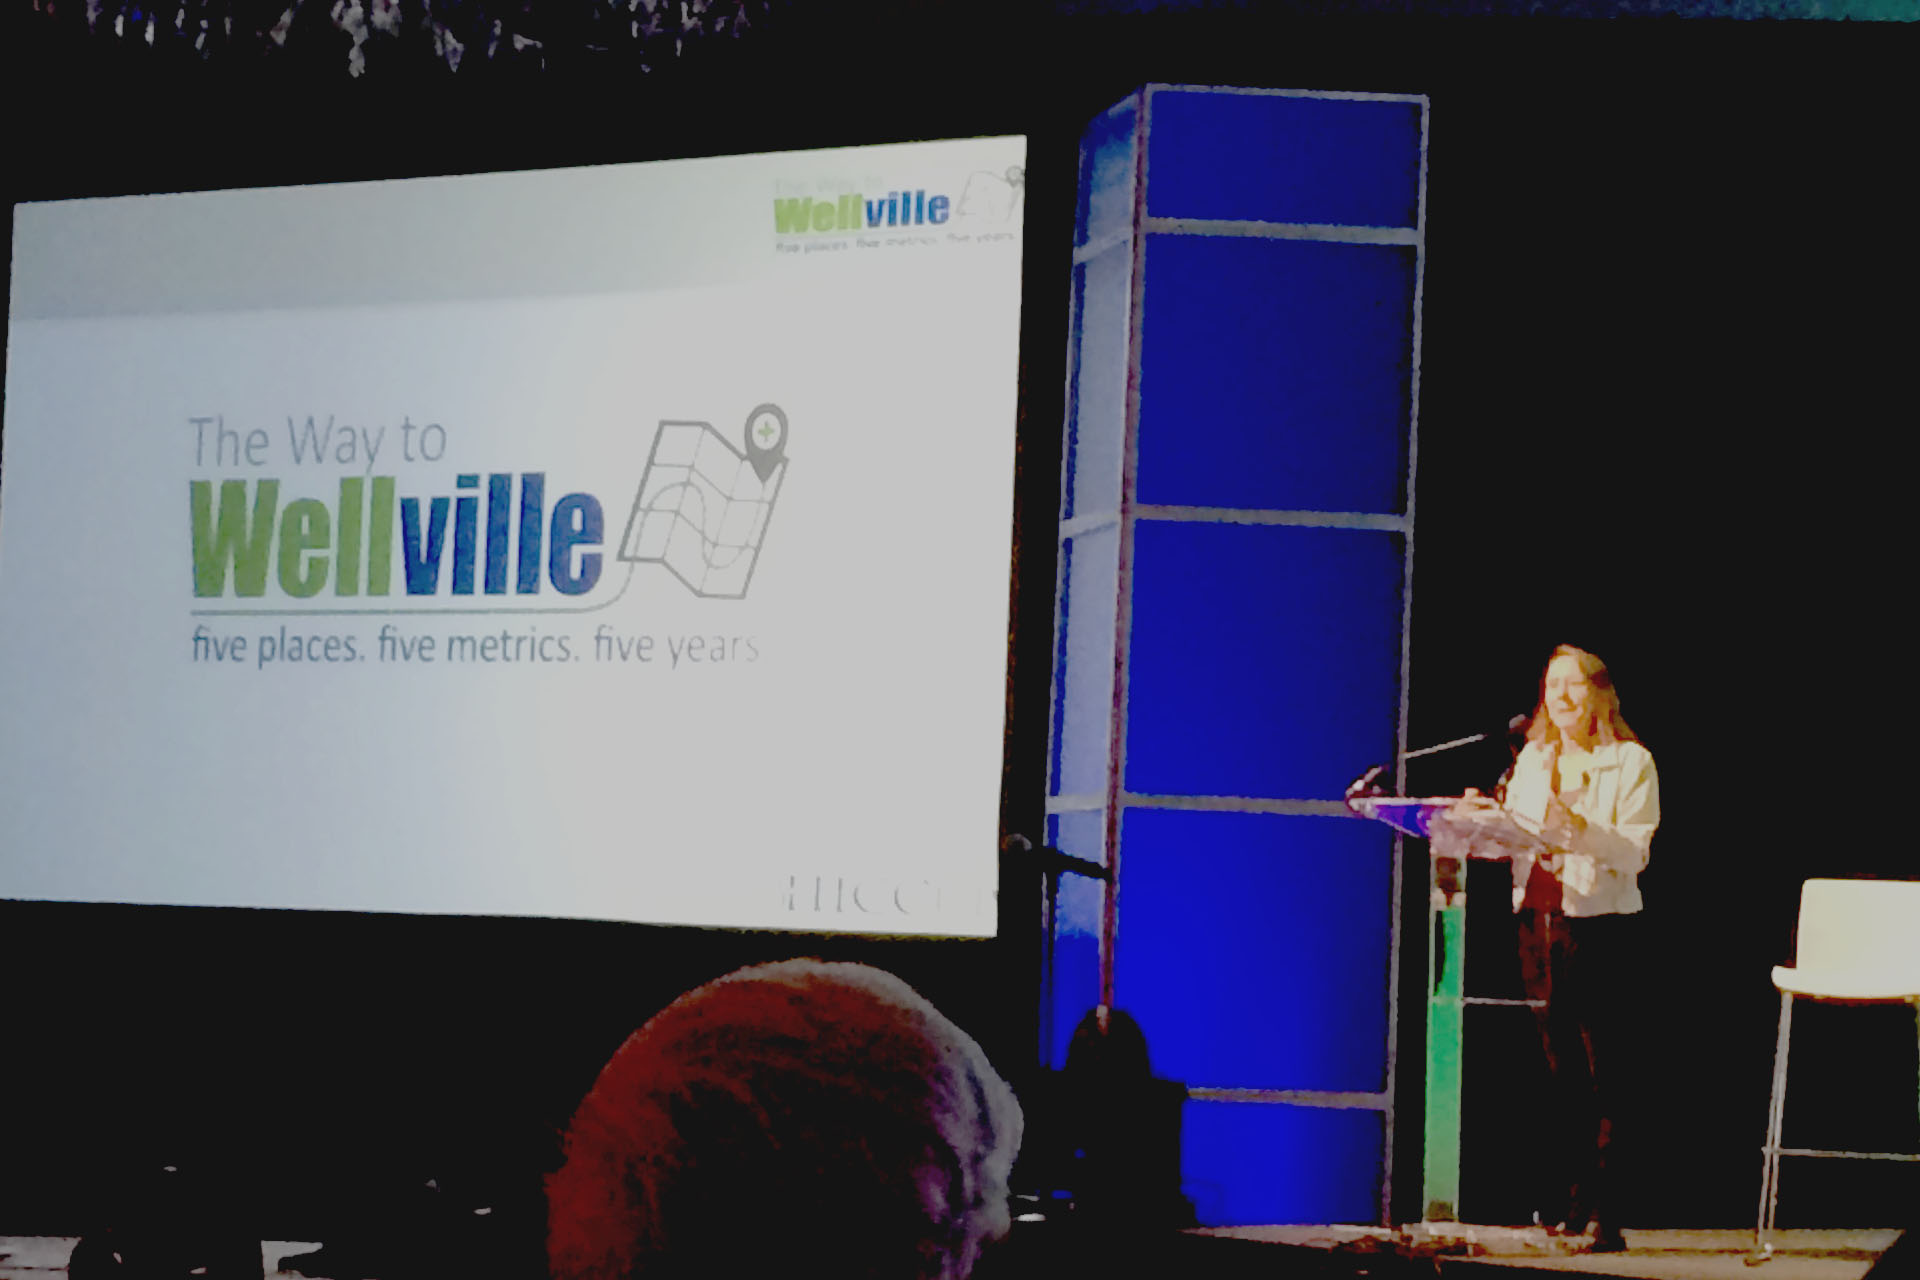 Esther introducing Wellville during the first-ever Wellville Gathering.